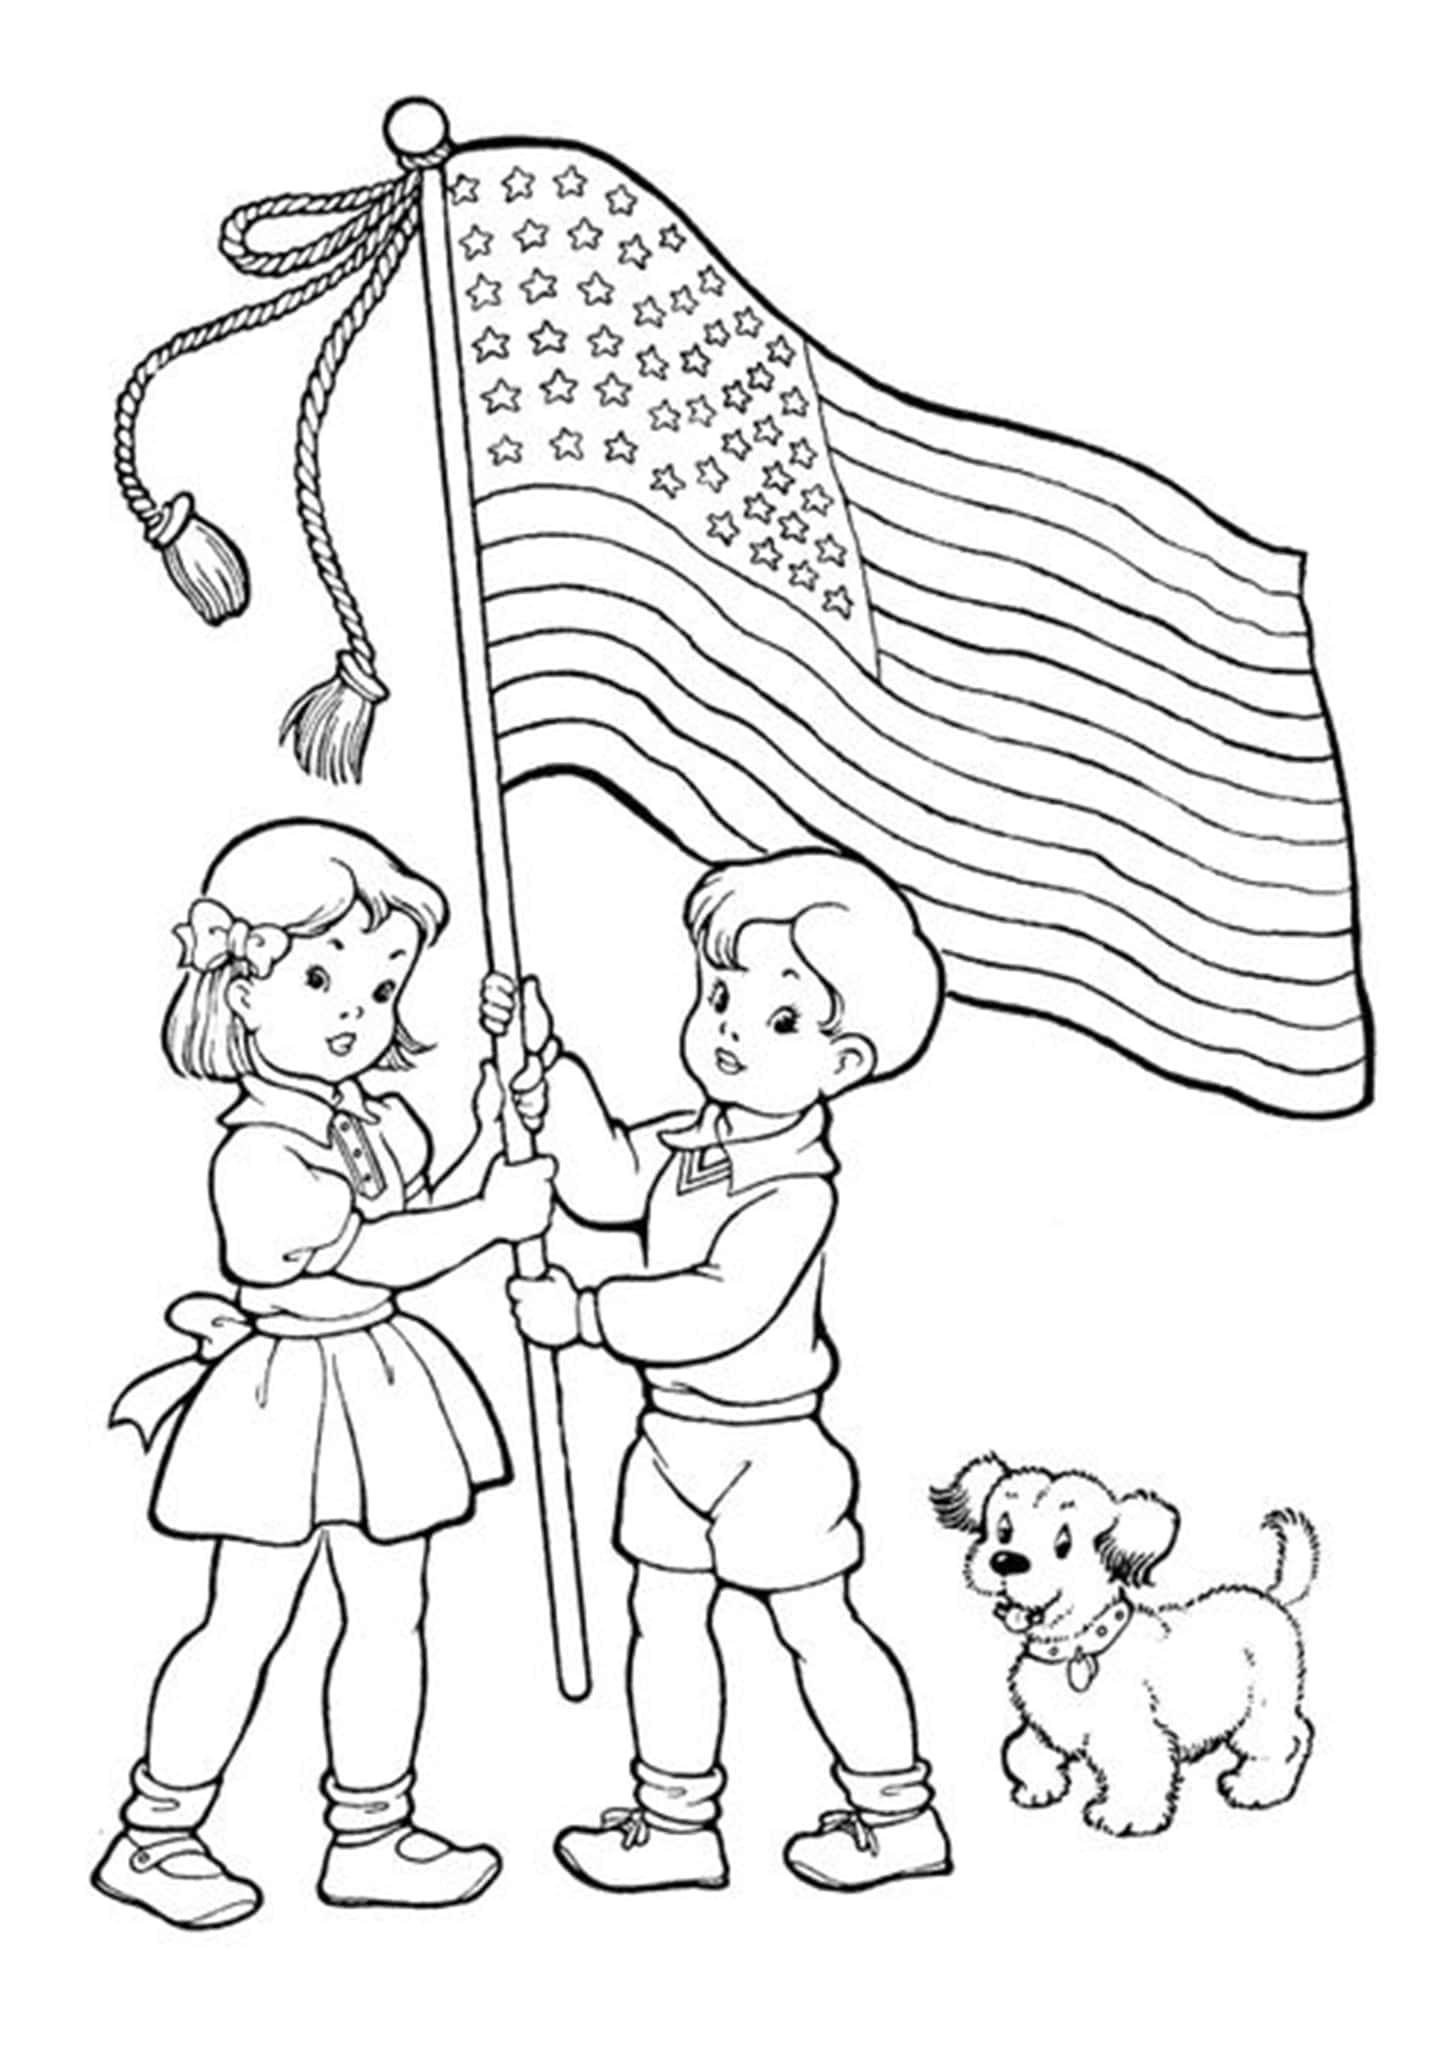 Free & Easy To Print 4th Of July Coloring Pages - Tulamama